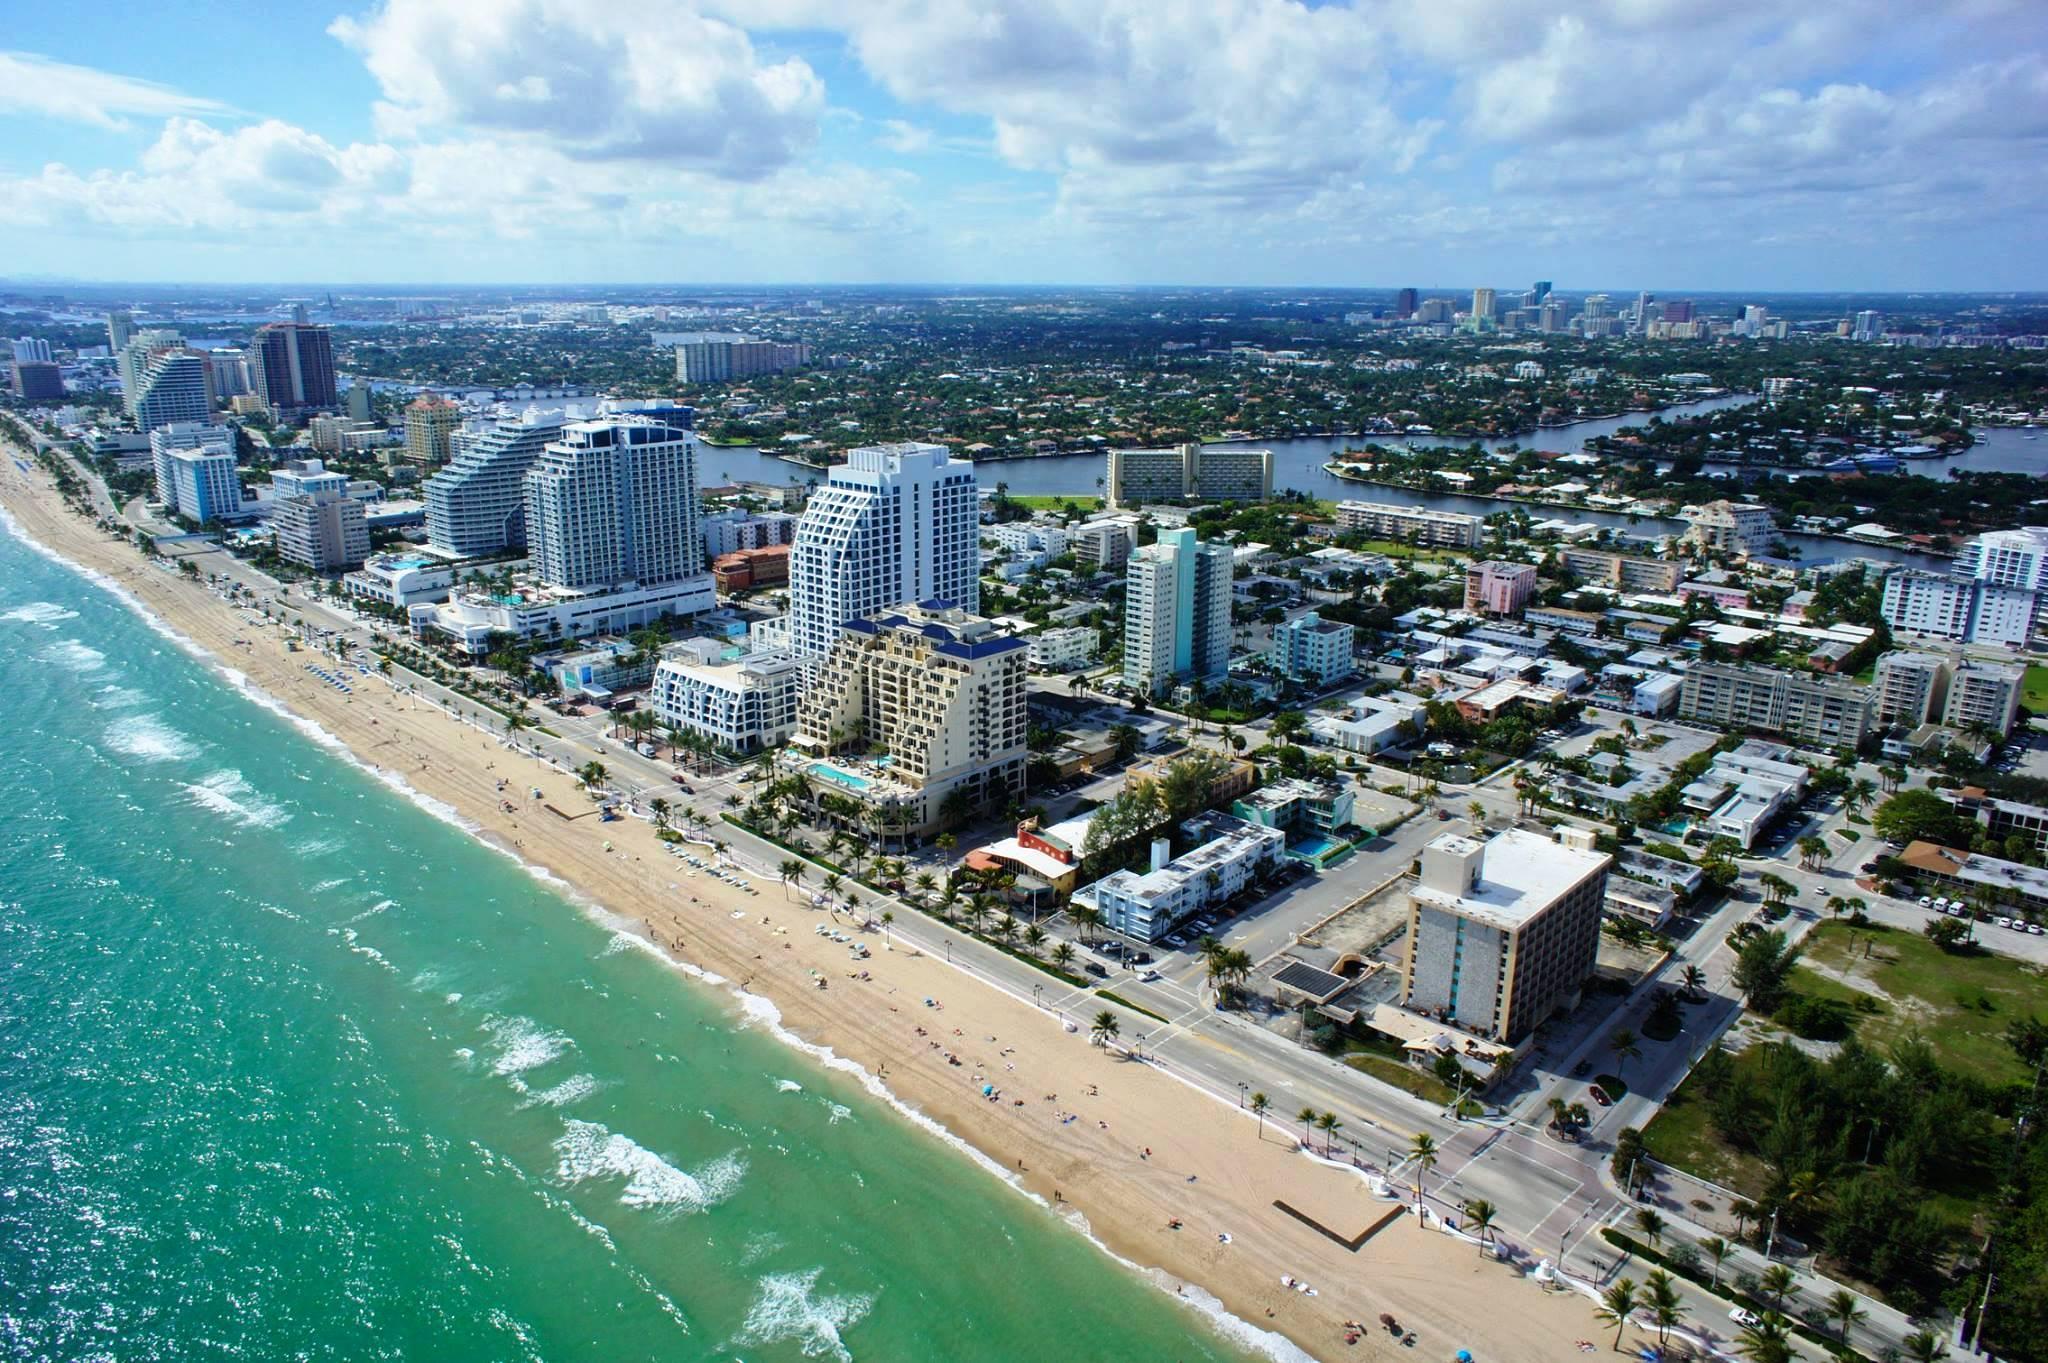 https://joshdotoligroup.com/wp-content/uploads/2024/03/Why-is-Fort-Lauderdale-so-famous.jpg